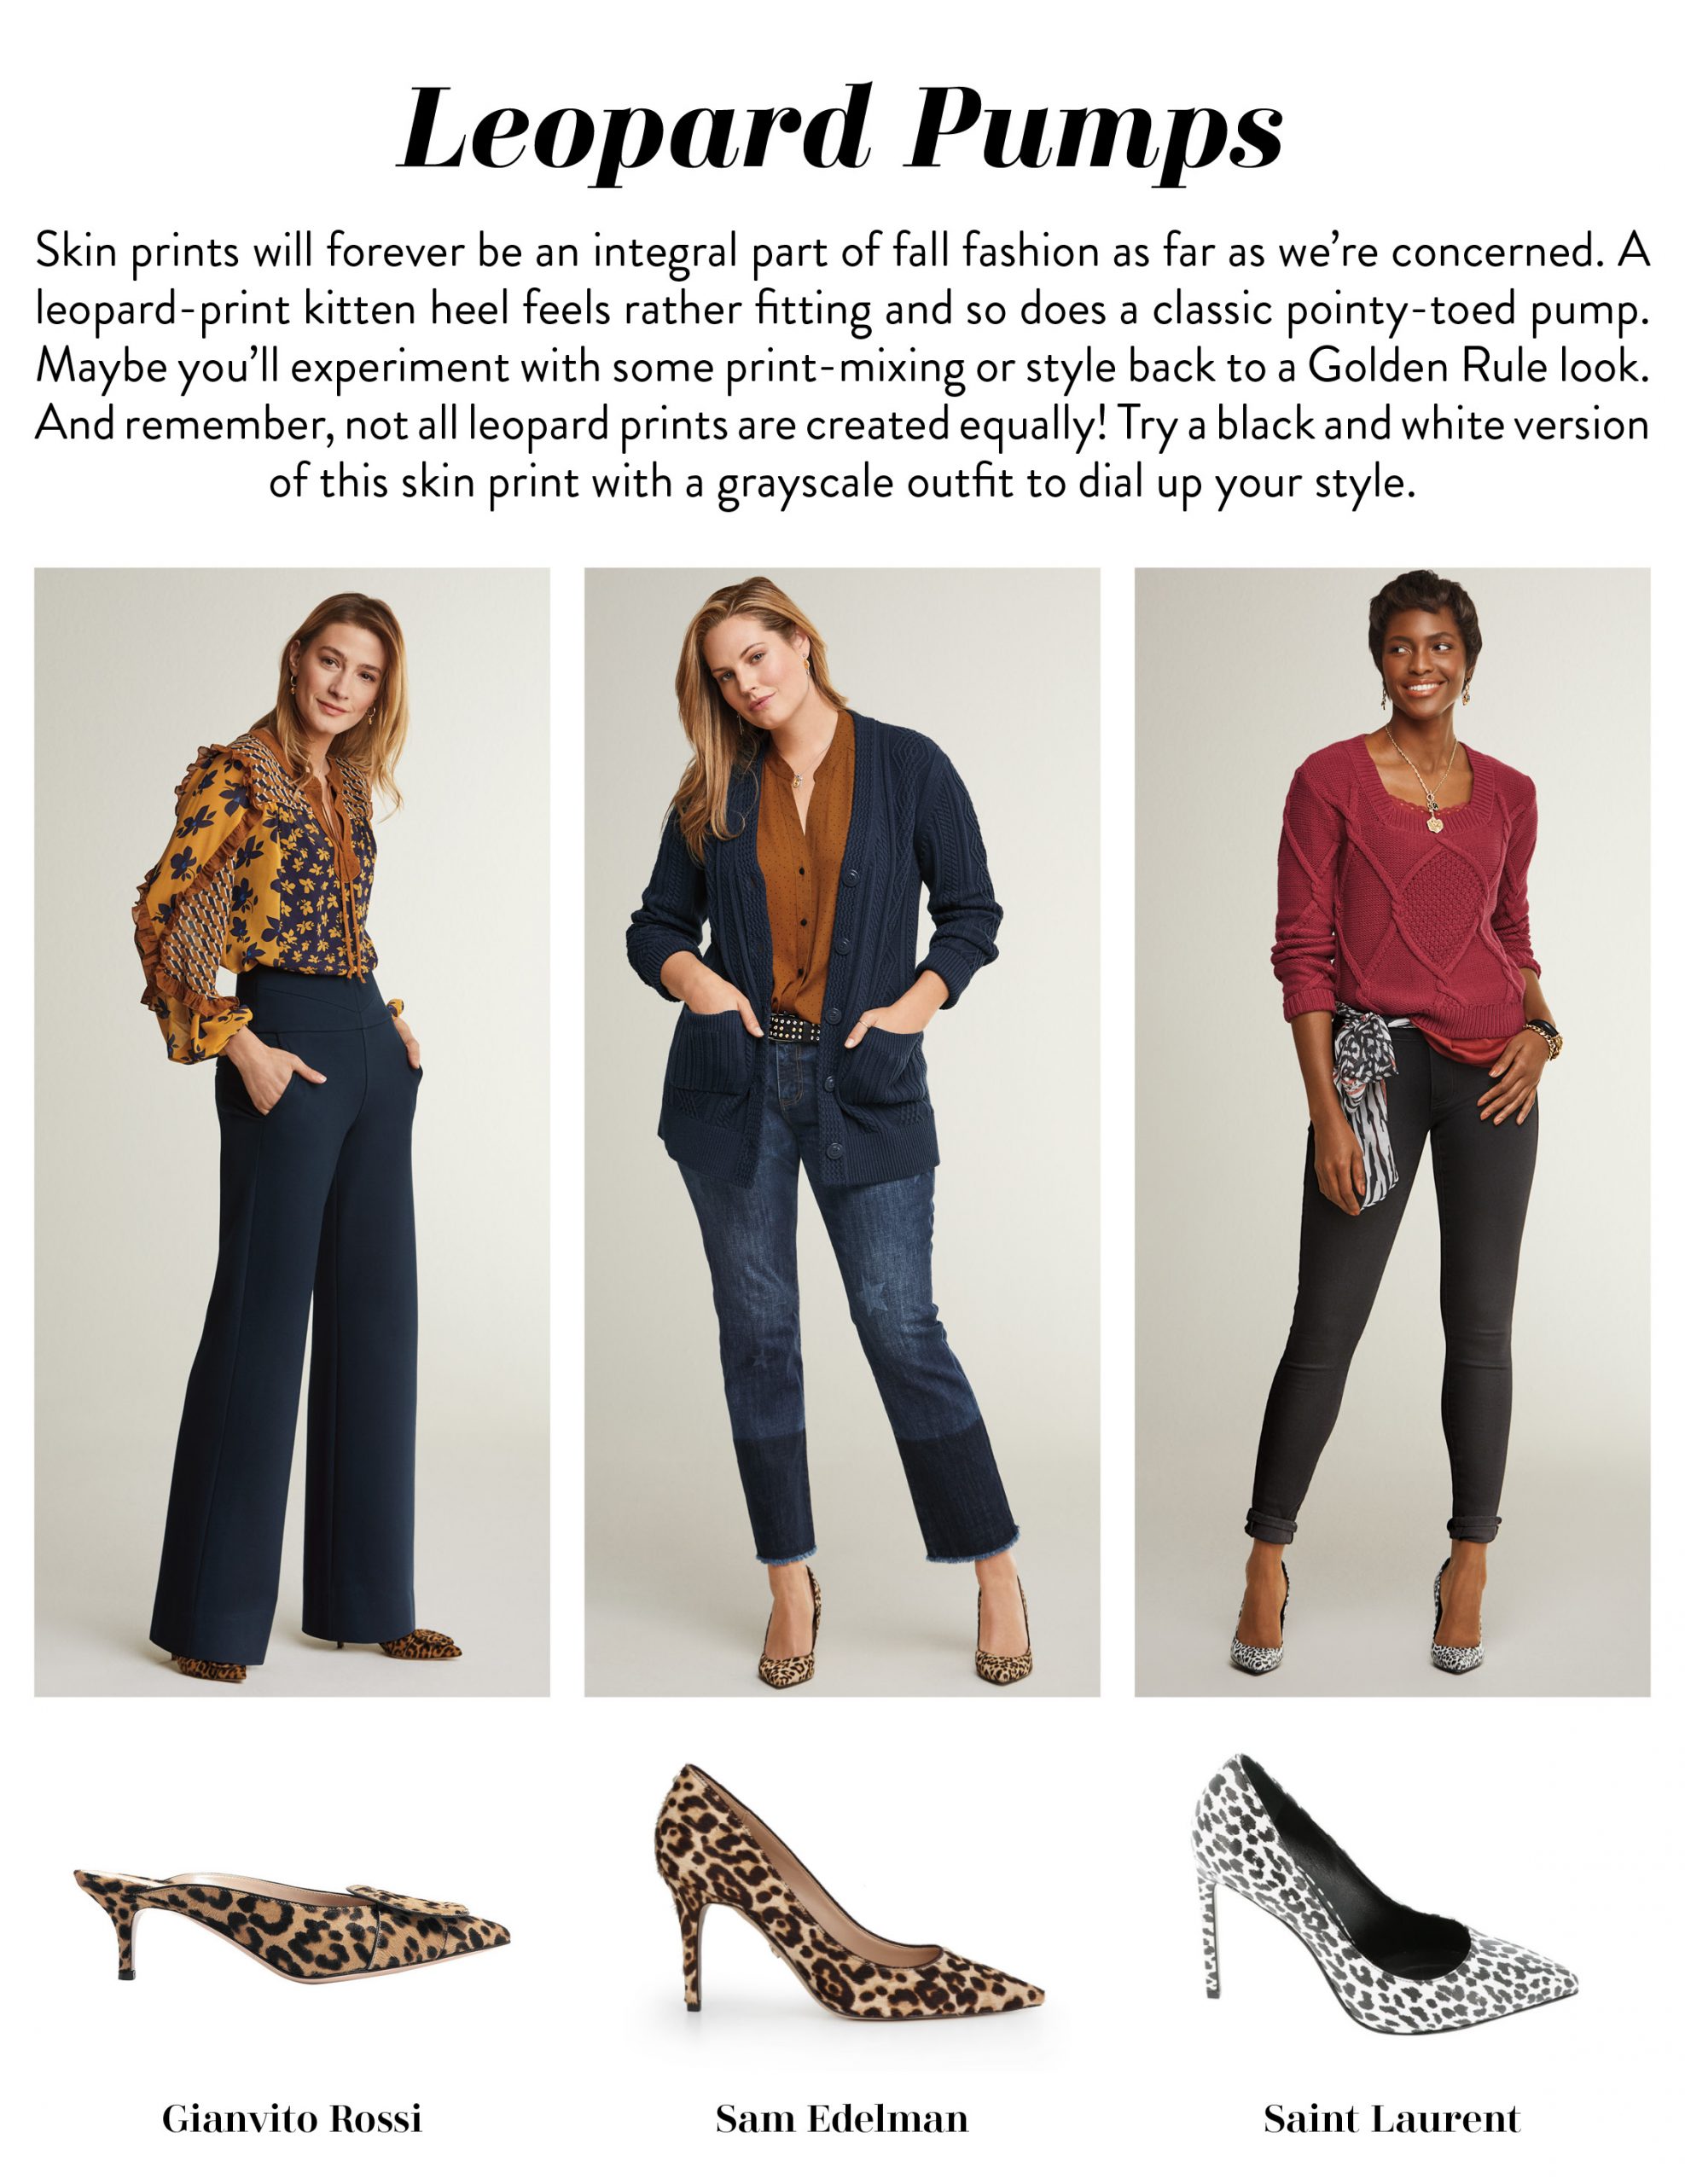 Cabi Fall 2020 Collection